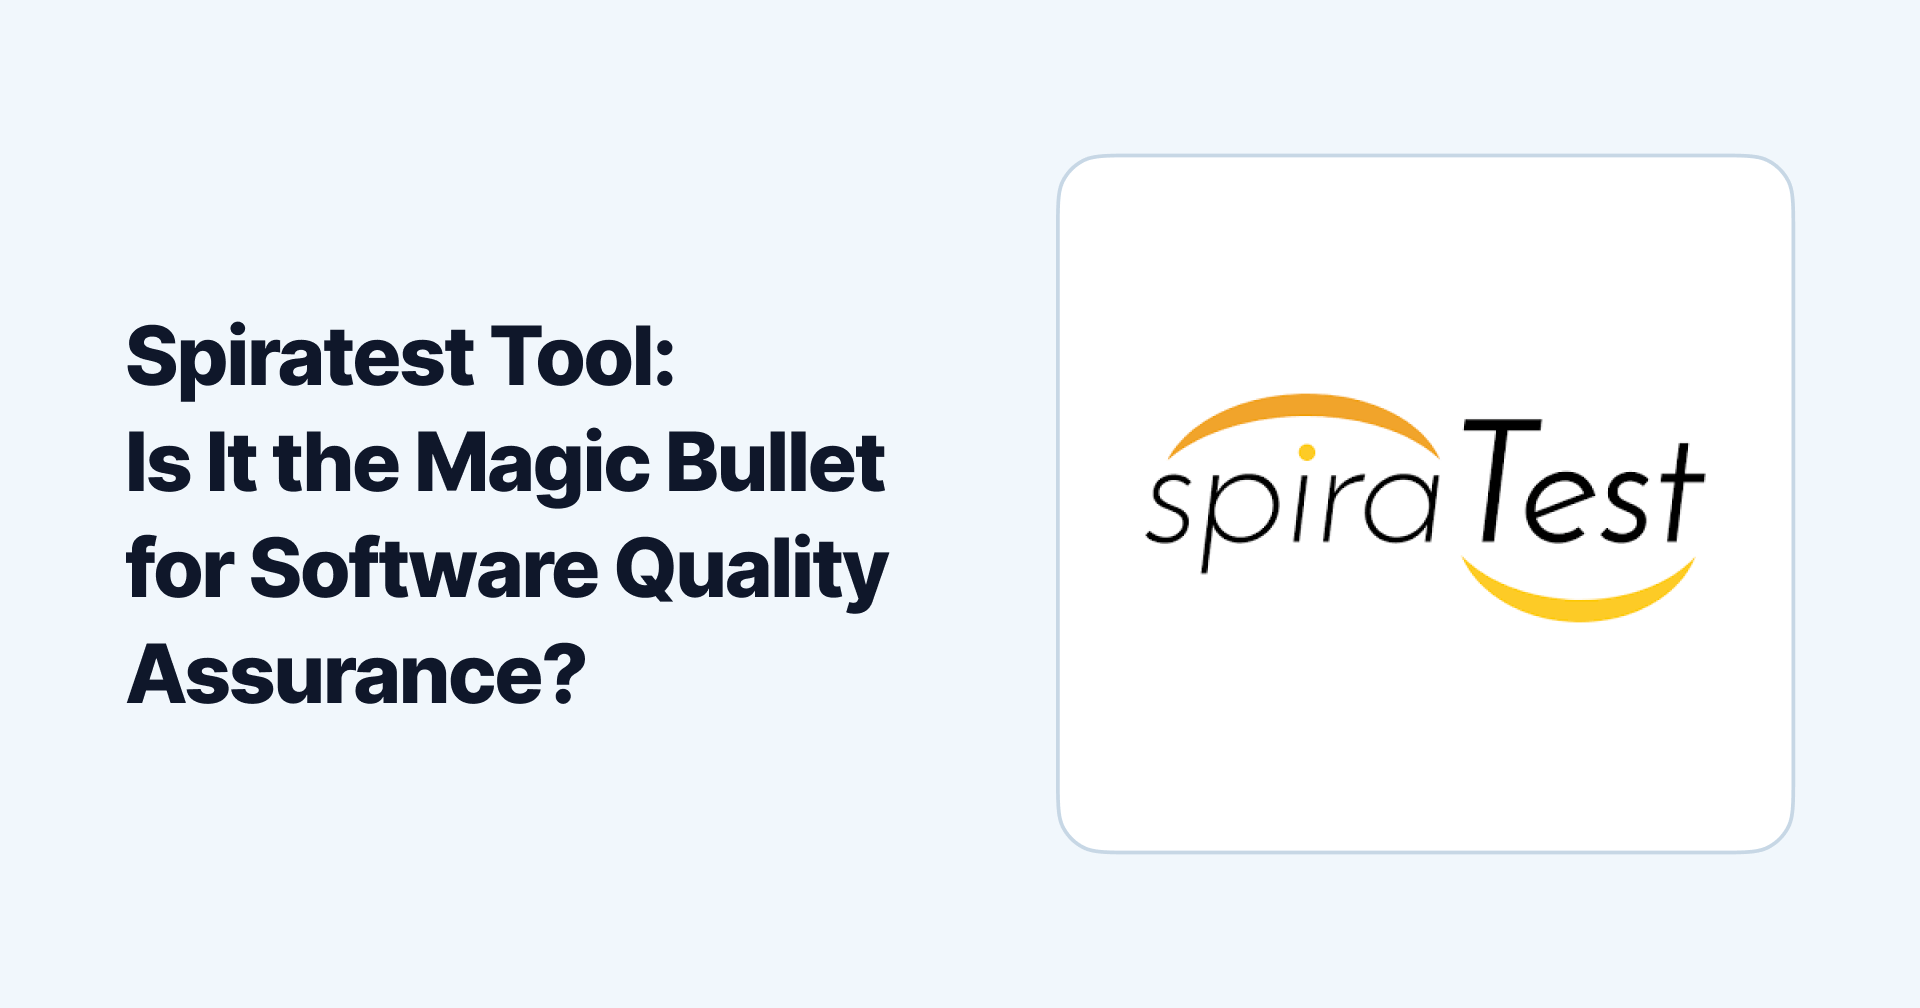 Spiratest Tool: Is It the Magic Bullet for Software Quality Assurance?